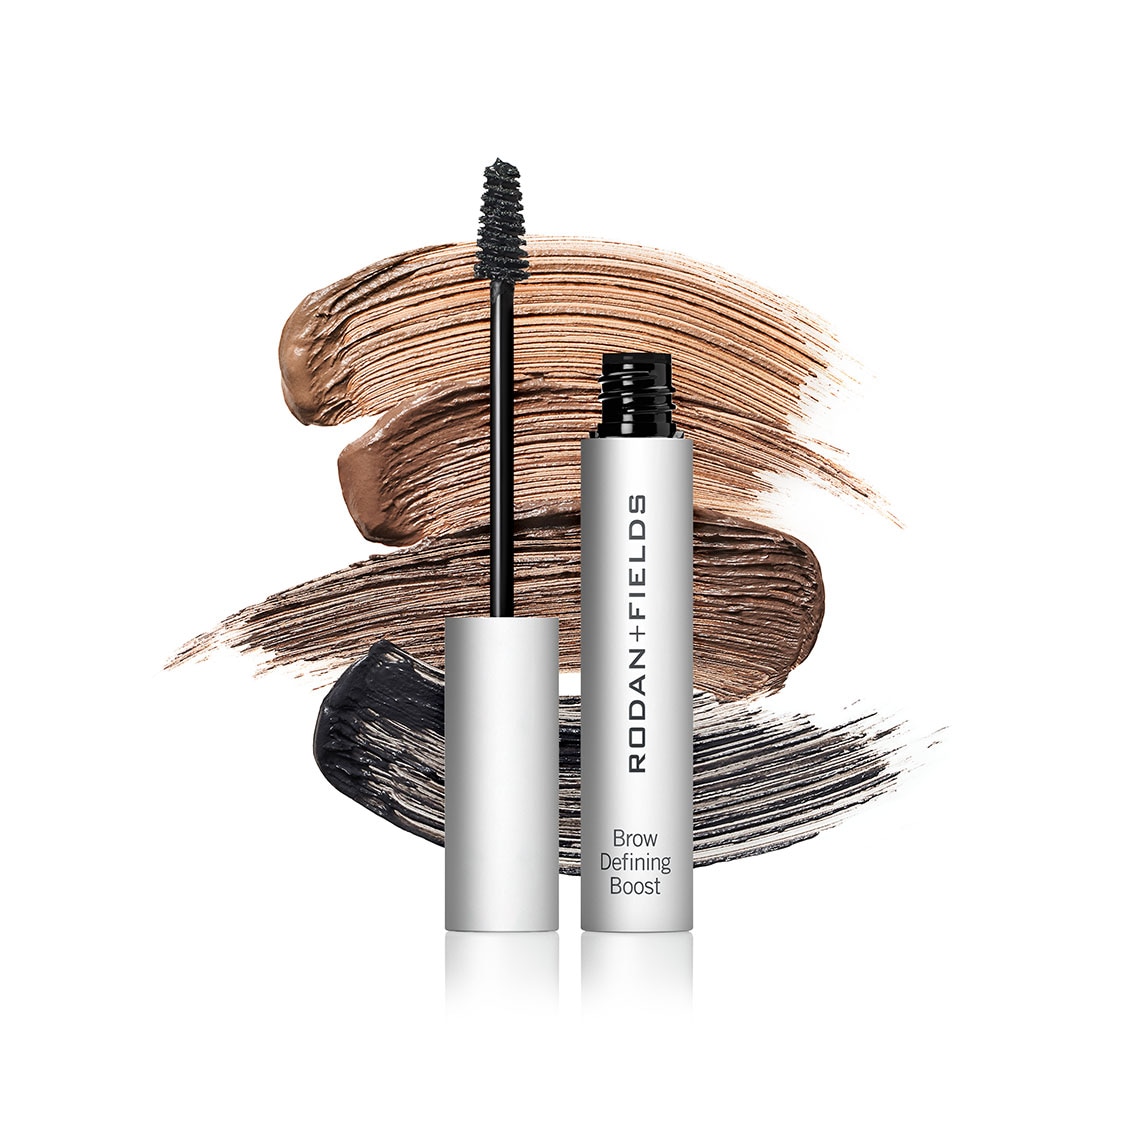 New! Brow Defining Boost